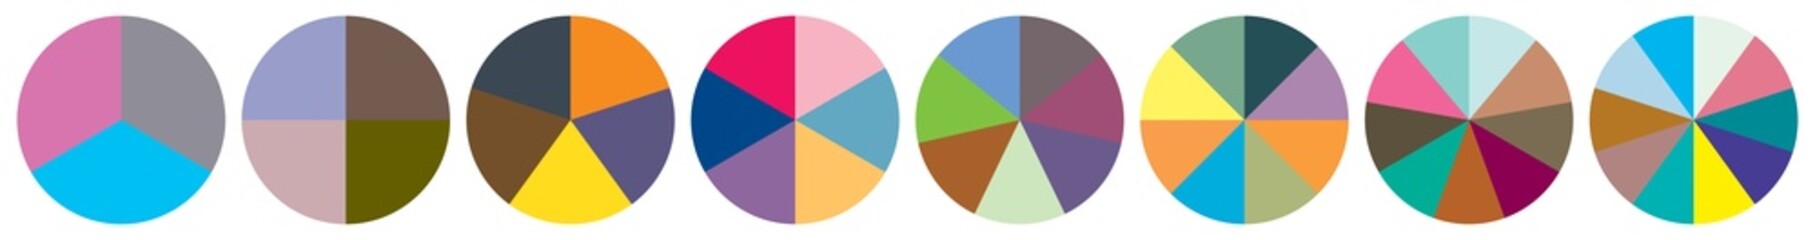 Pie chart, pie graph, segmented circles, circular diagram from 3 to 10 sections, portions, parts. Ratio concept